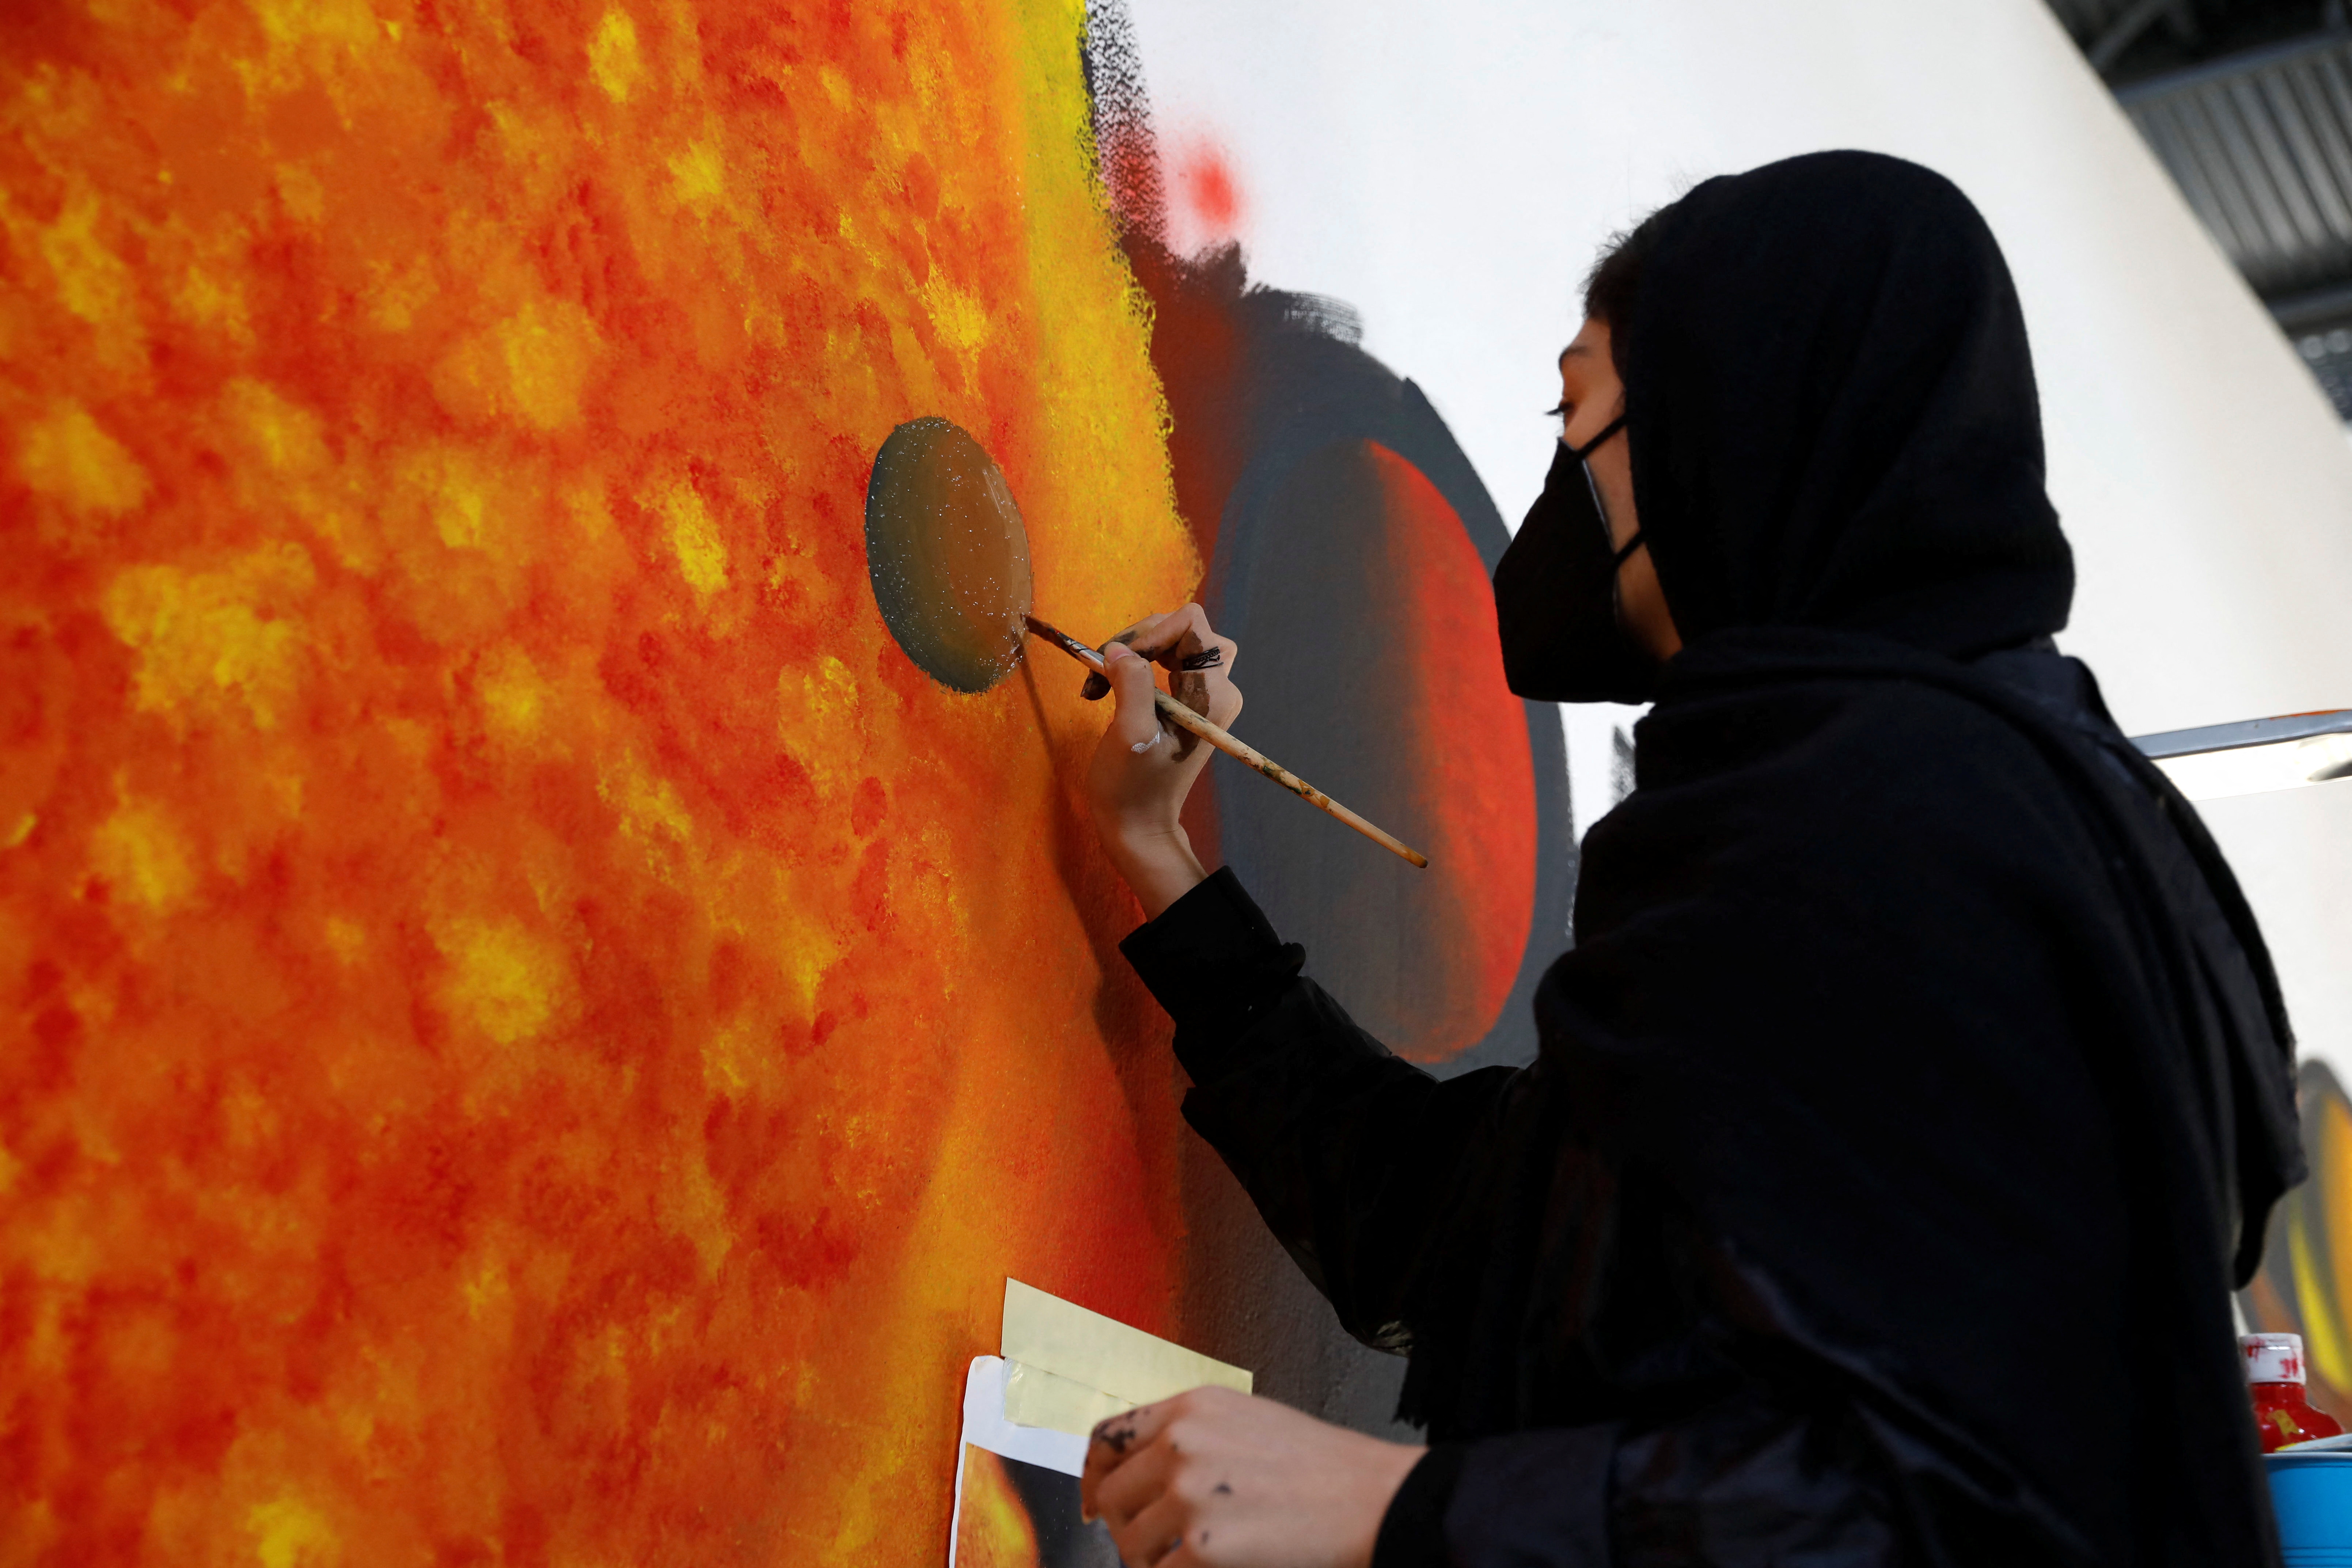 Roya Rasuli, an 18-year-old Afghan migrant artist, draws on a wall at a camp for refugees and migrants, in Thiva